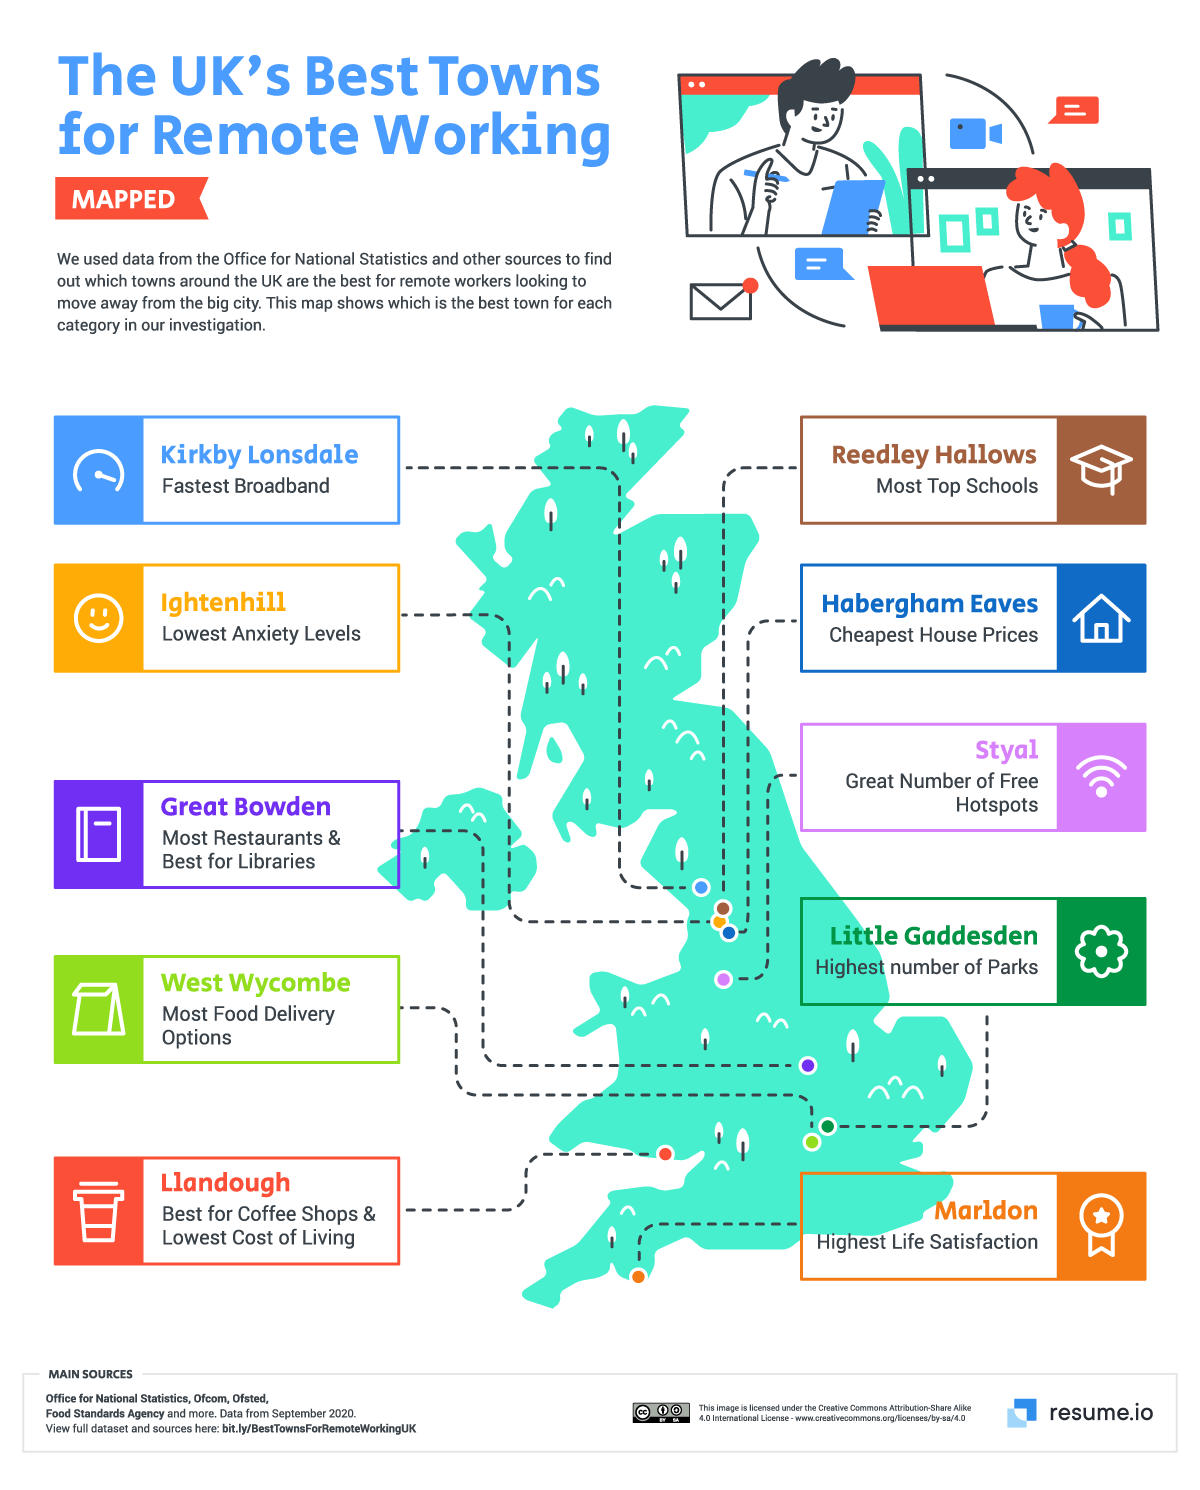 The top UK towns for remote working, mapped by category